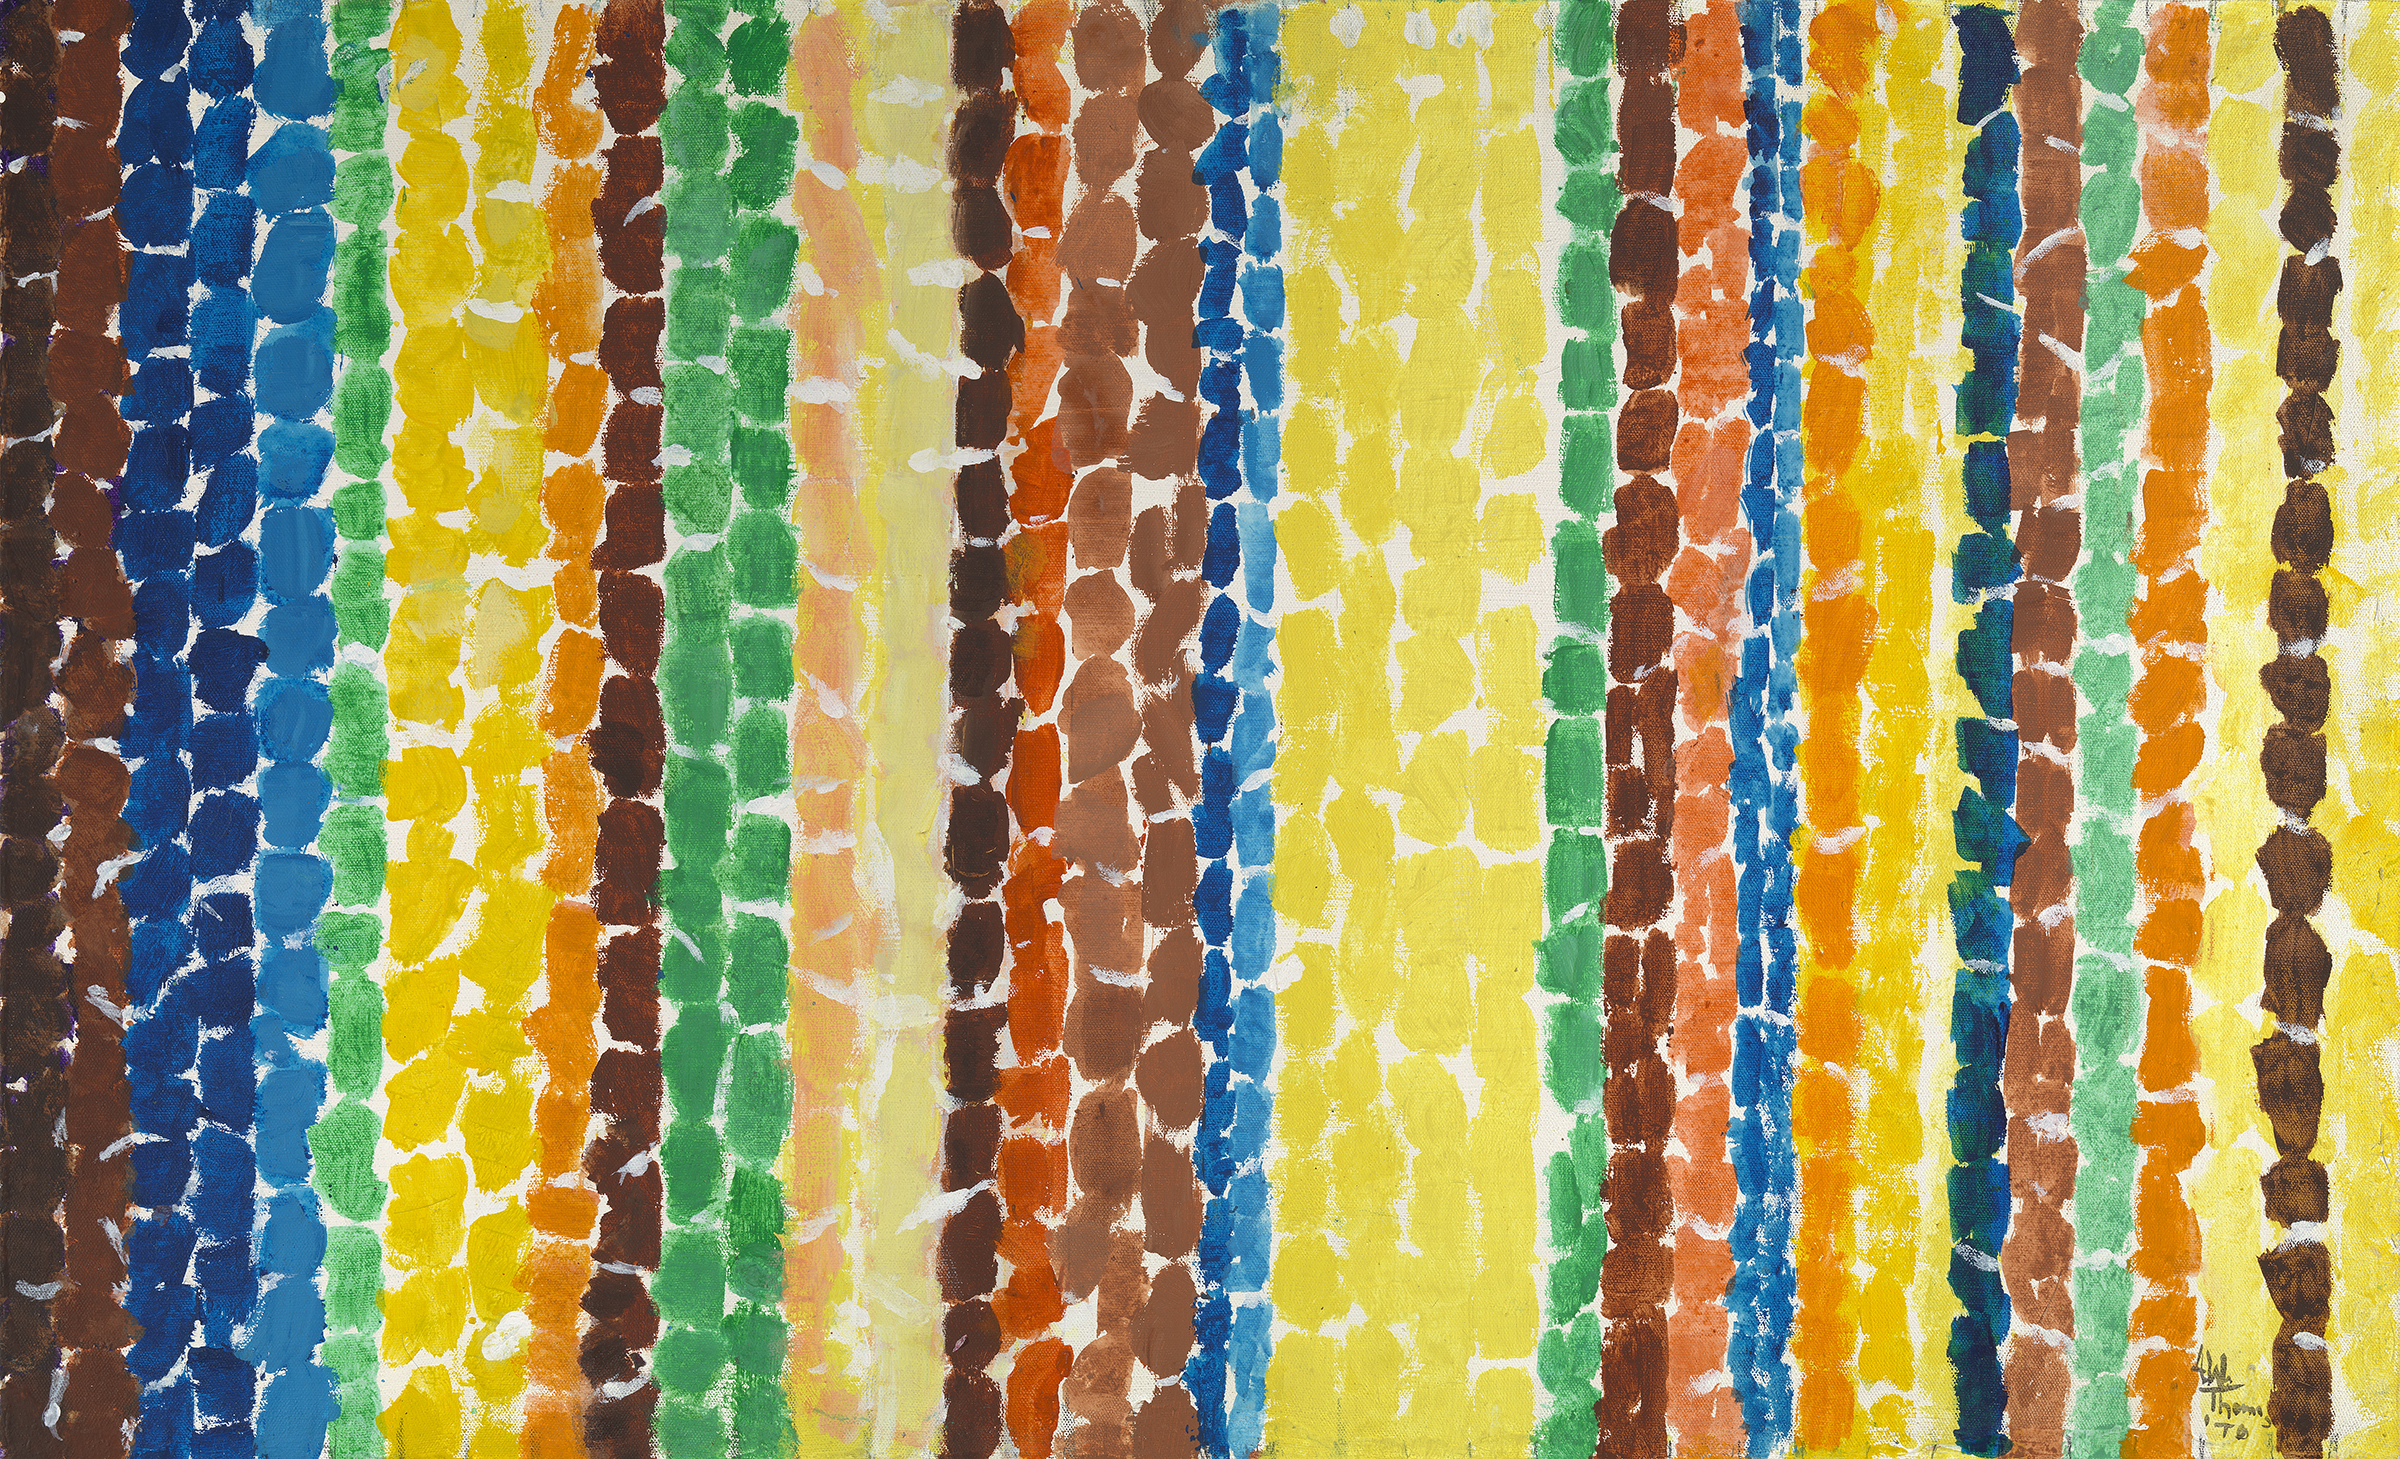 Forsythia and Pussy Willows Begin Spring, 1970, Alma Thomas (American, 1891–1978) acrylic on canvas. Collection of the Virginia Museum of Fine Arts